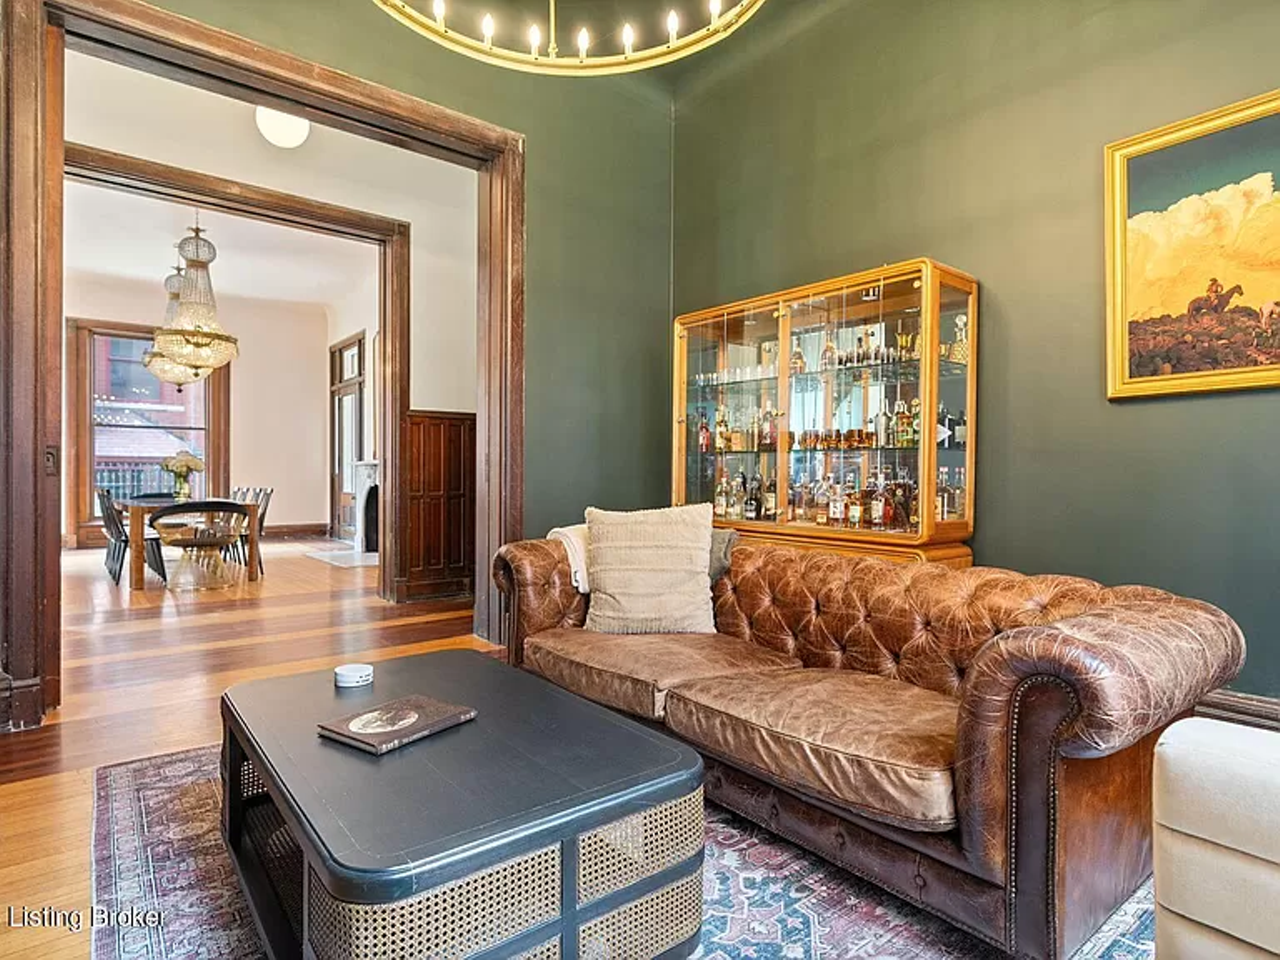 This Victorian Mansion Renovation In Old Louisville Is Like Nothing You've Seen Before